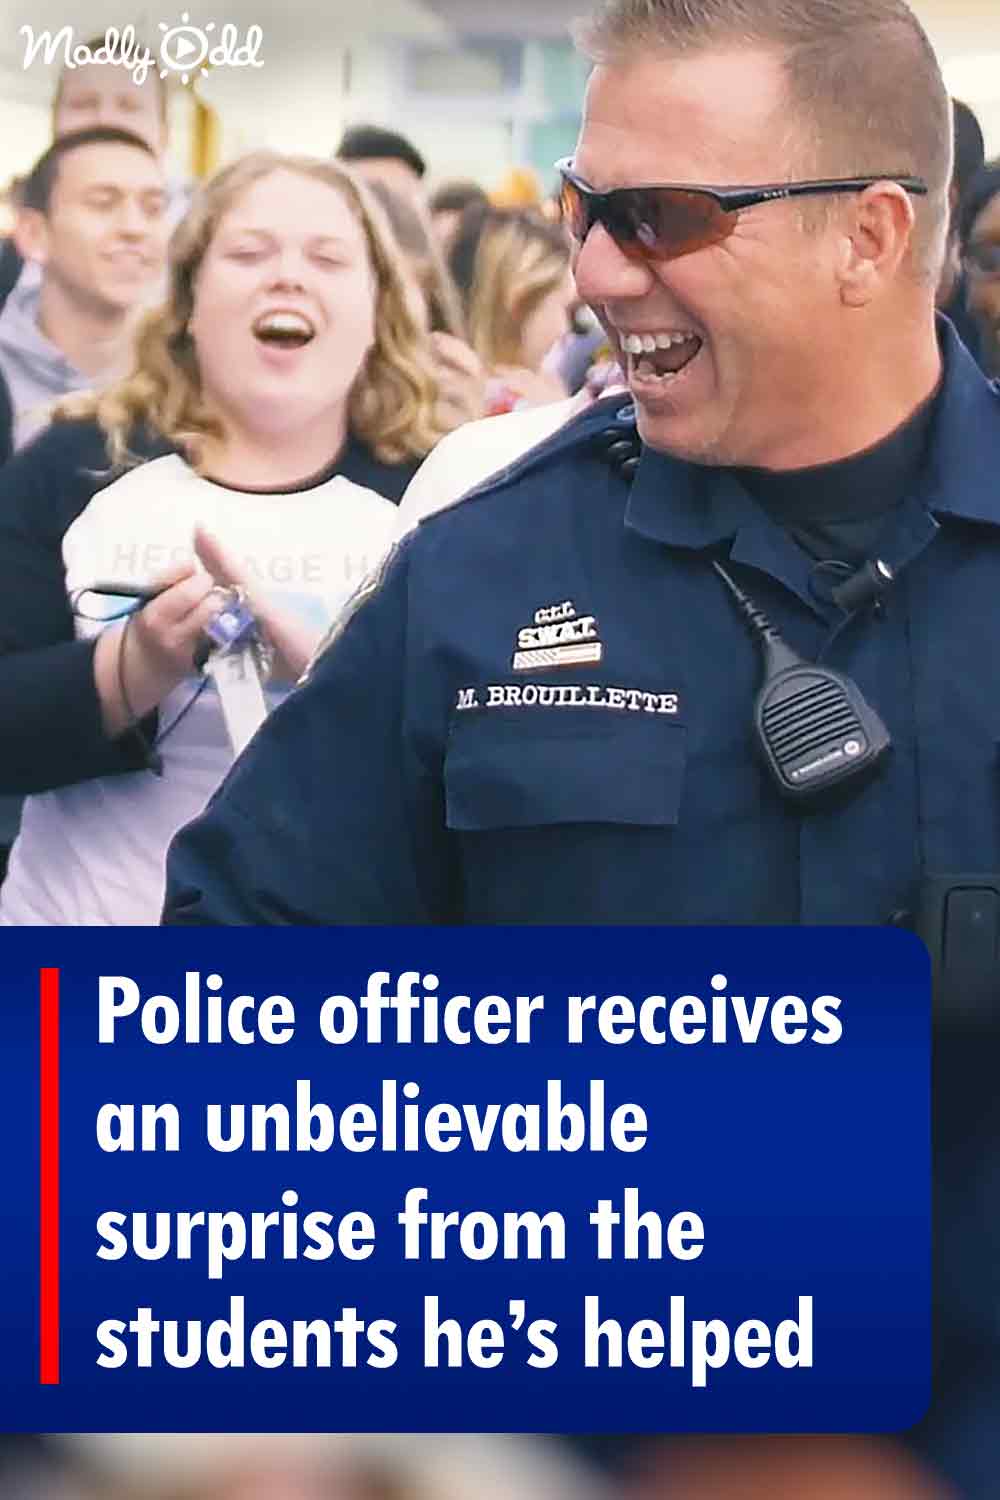 Police officer receives an unbelievable surprise from the students he’s helped